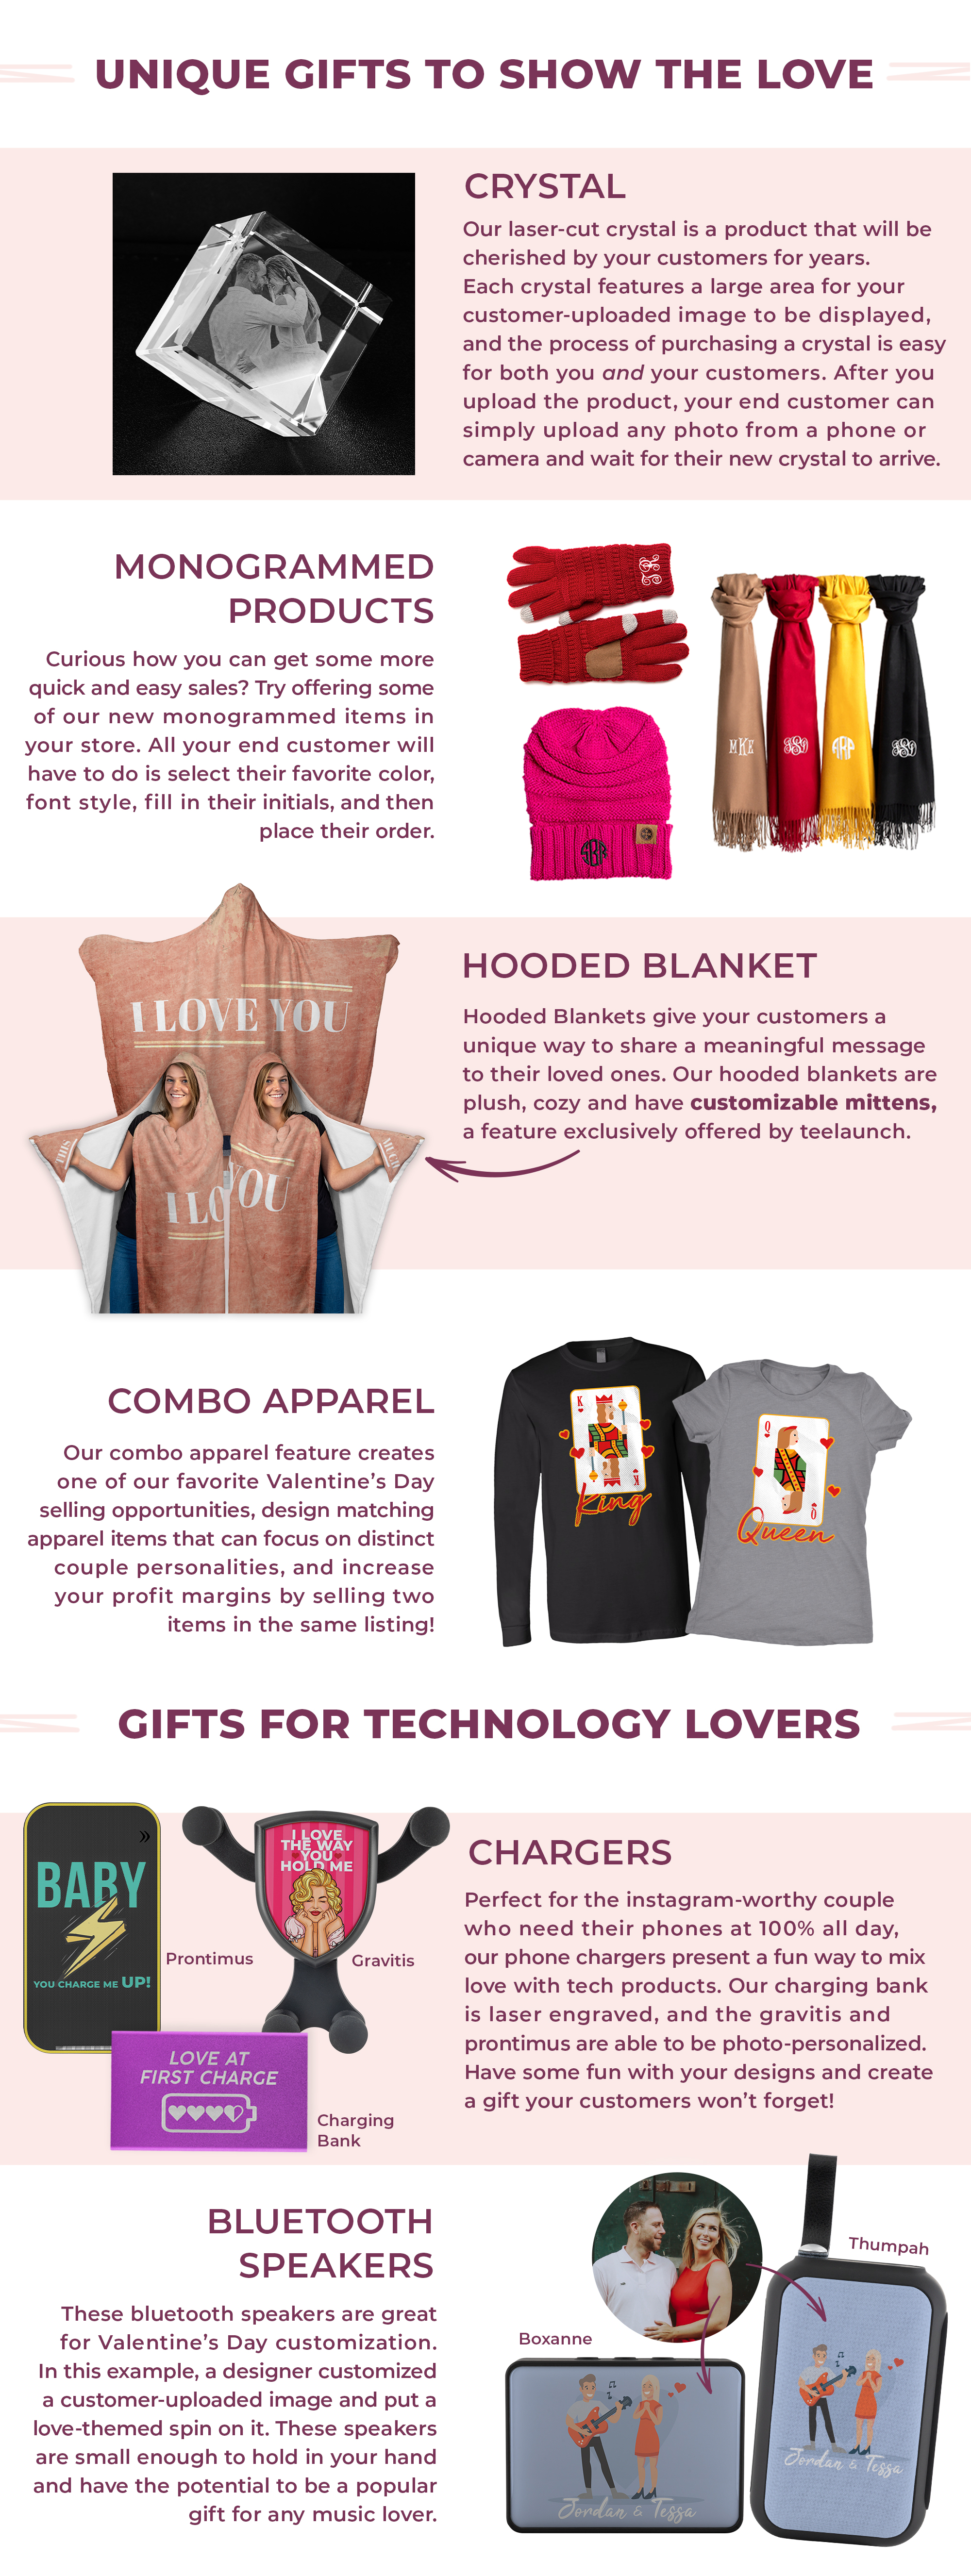 Share The Love This Year With Our Top Selling Valentine's Day Products